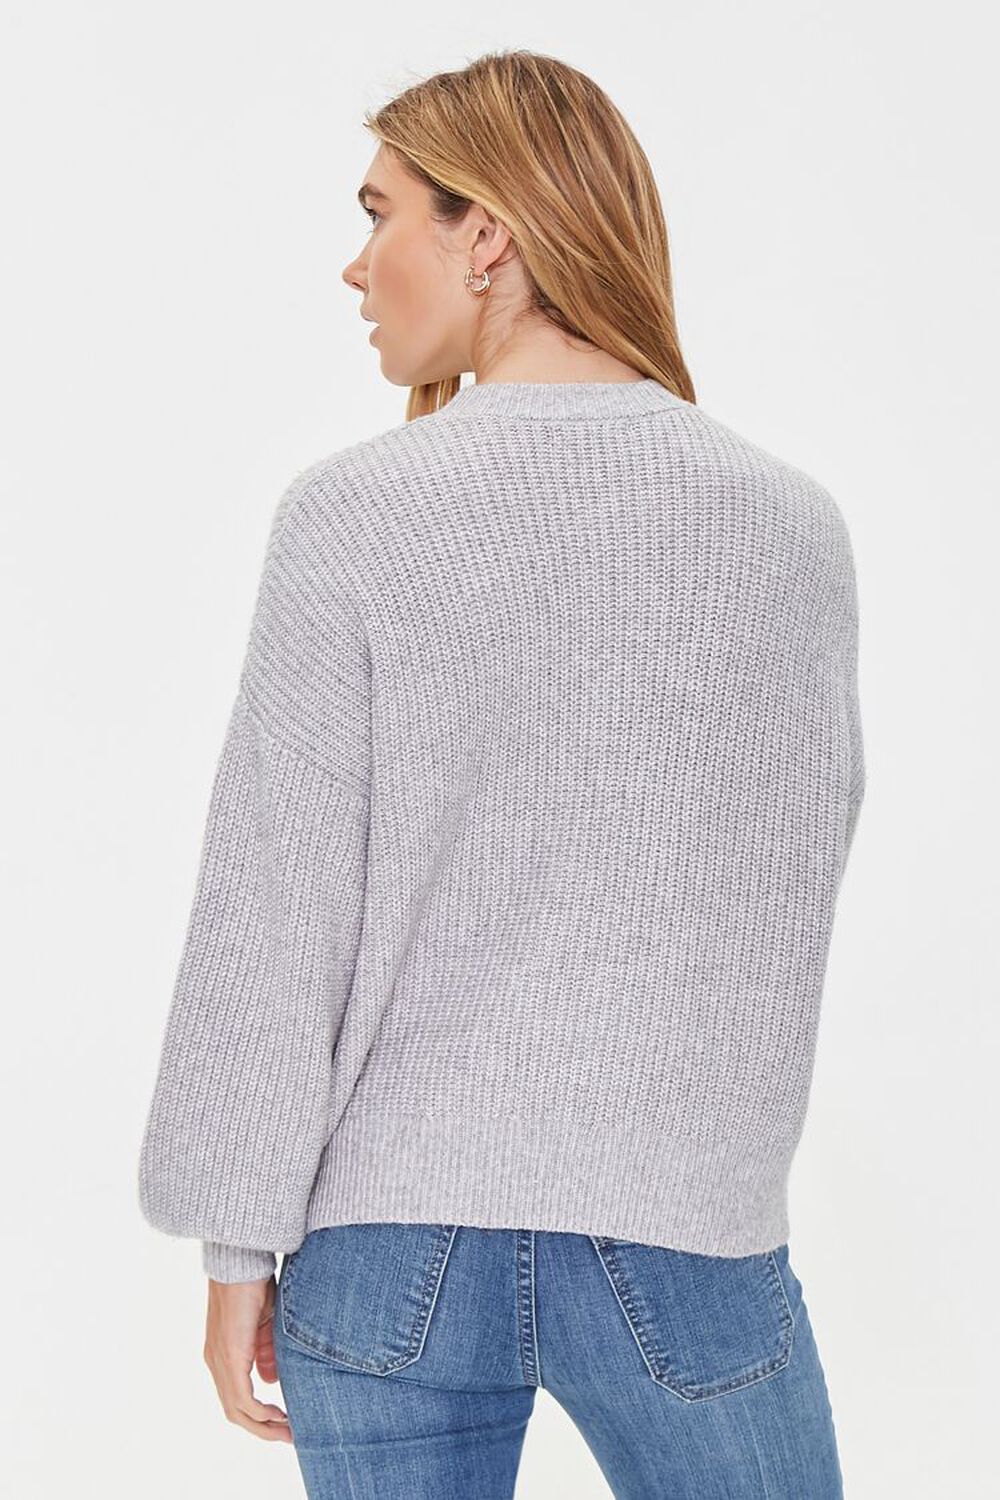 HEATHER GREY Purl Knit Drop-Sleeve Sweater, image 3